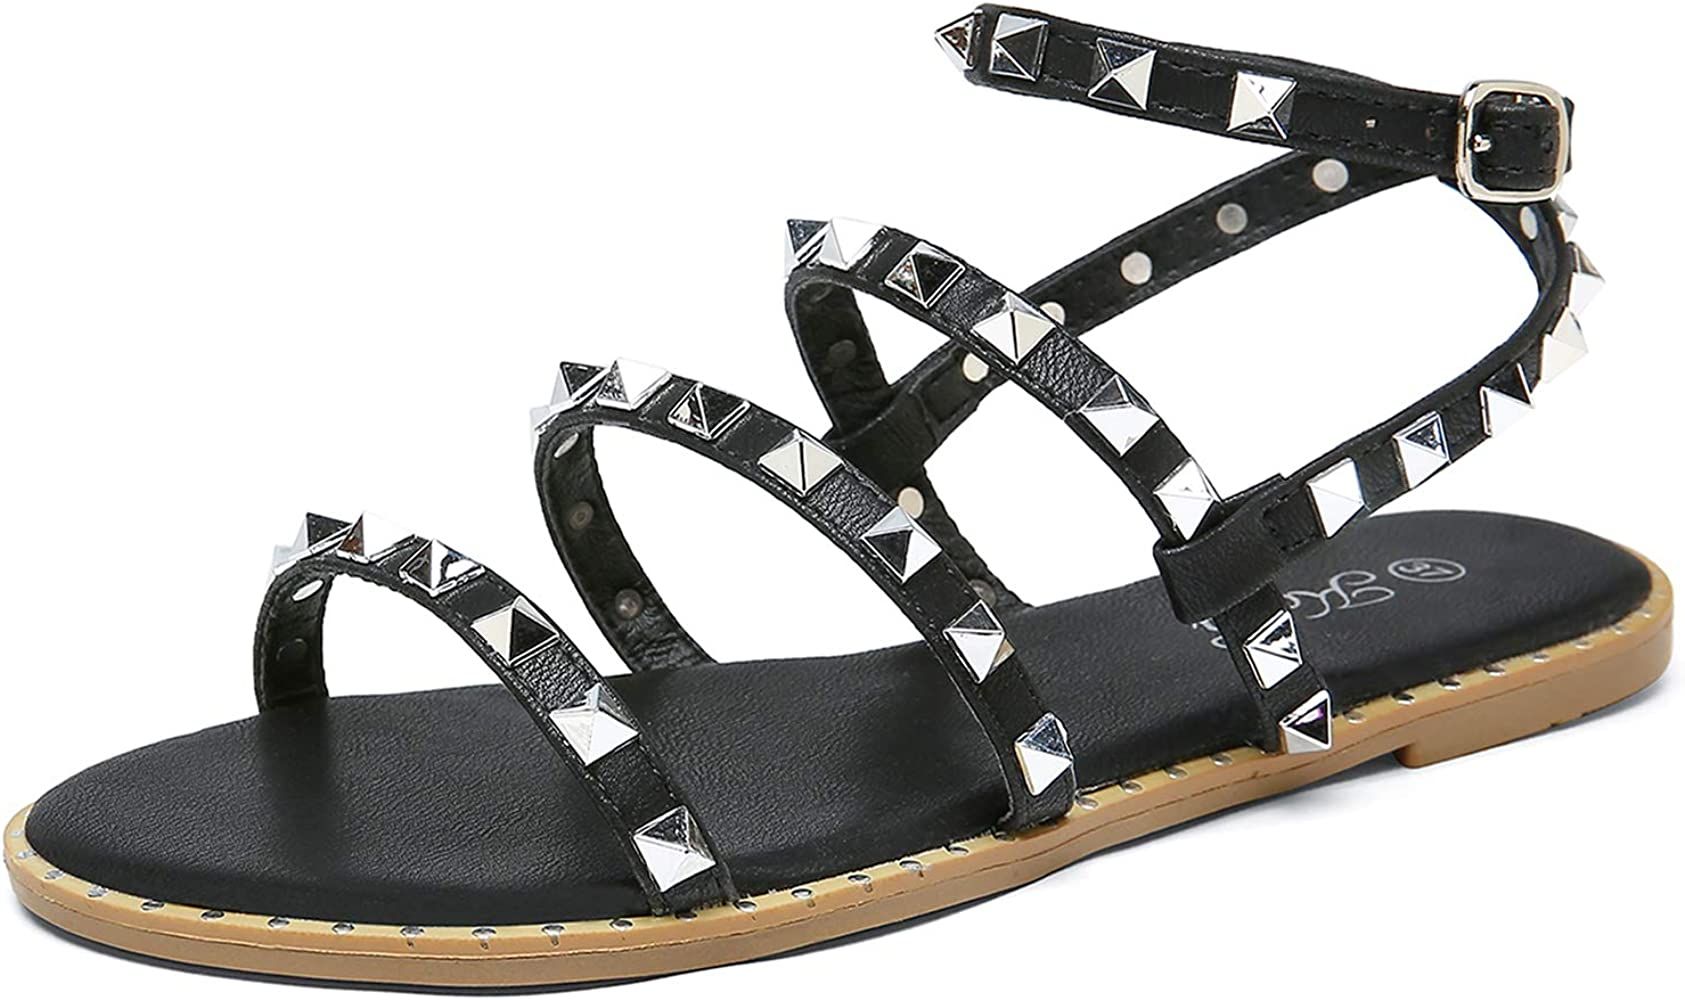 Women's Flat Sandals Strappy Studded Sandals Gladiator Sandals with Ankle Strap | Amazon (US)